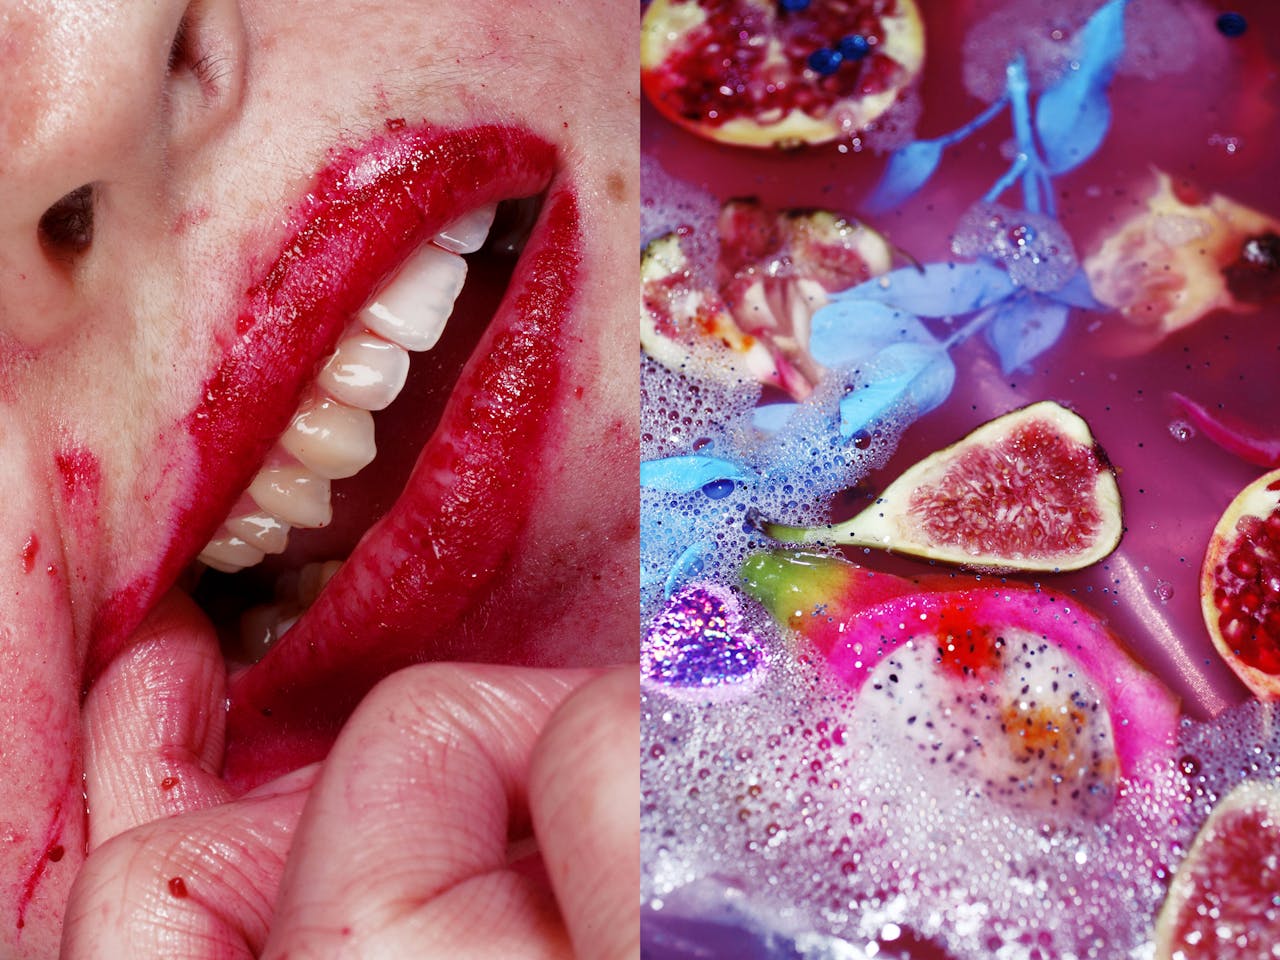 A split image: on the left hand side a person puts a finger into a mouth with smeared lipstick. On the right hand side colourful tropical fruits float in pink soapy water. 